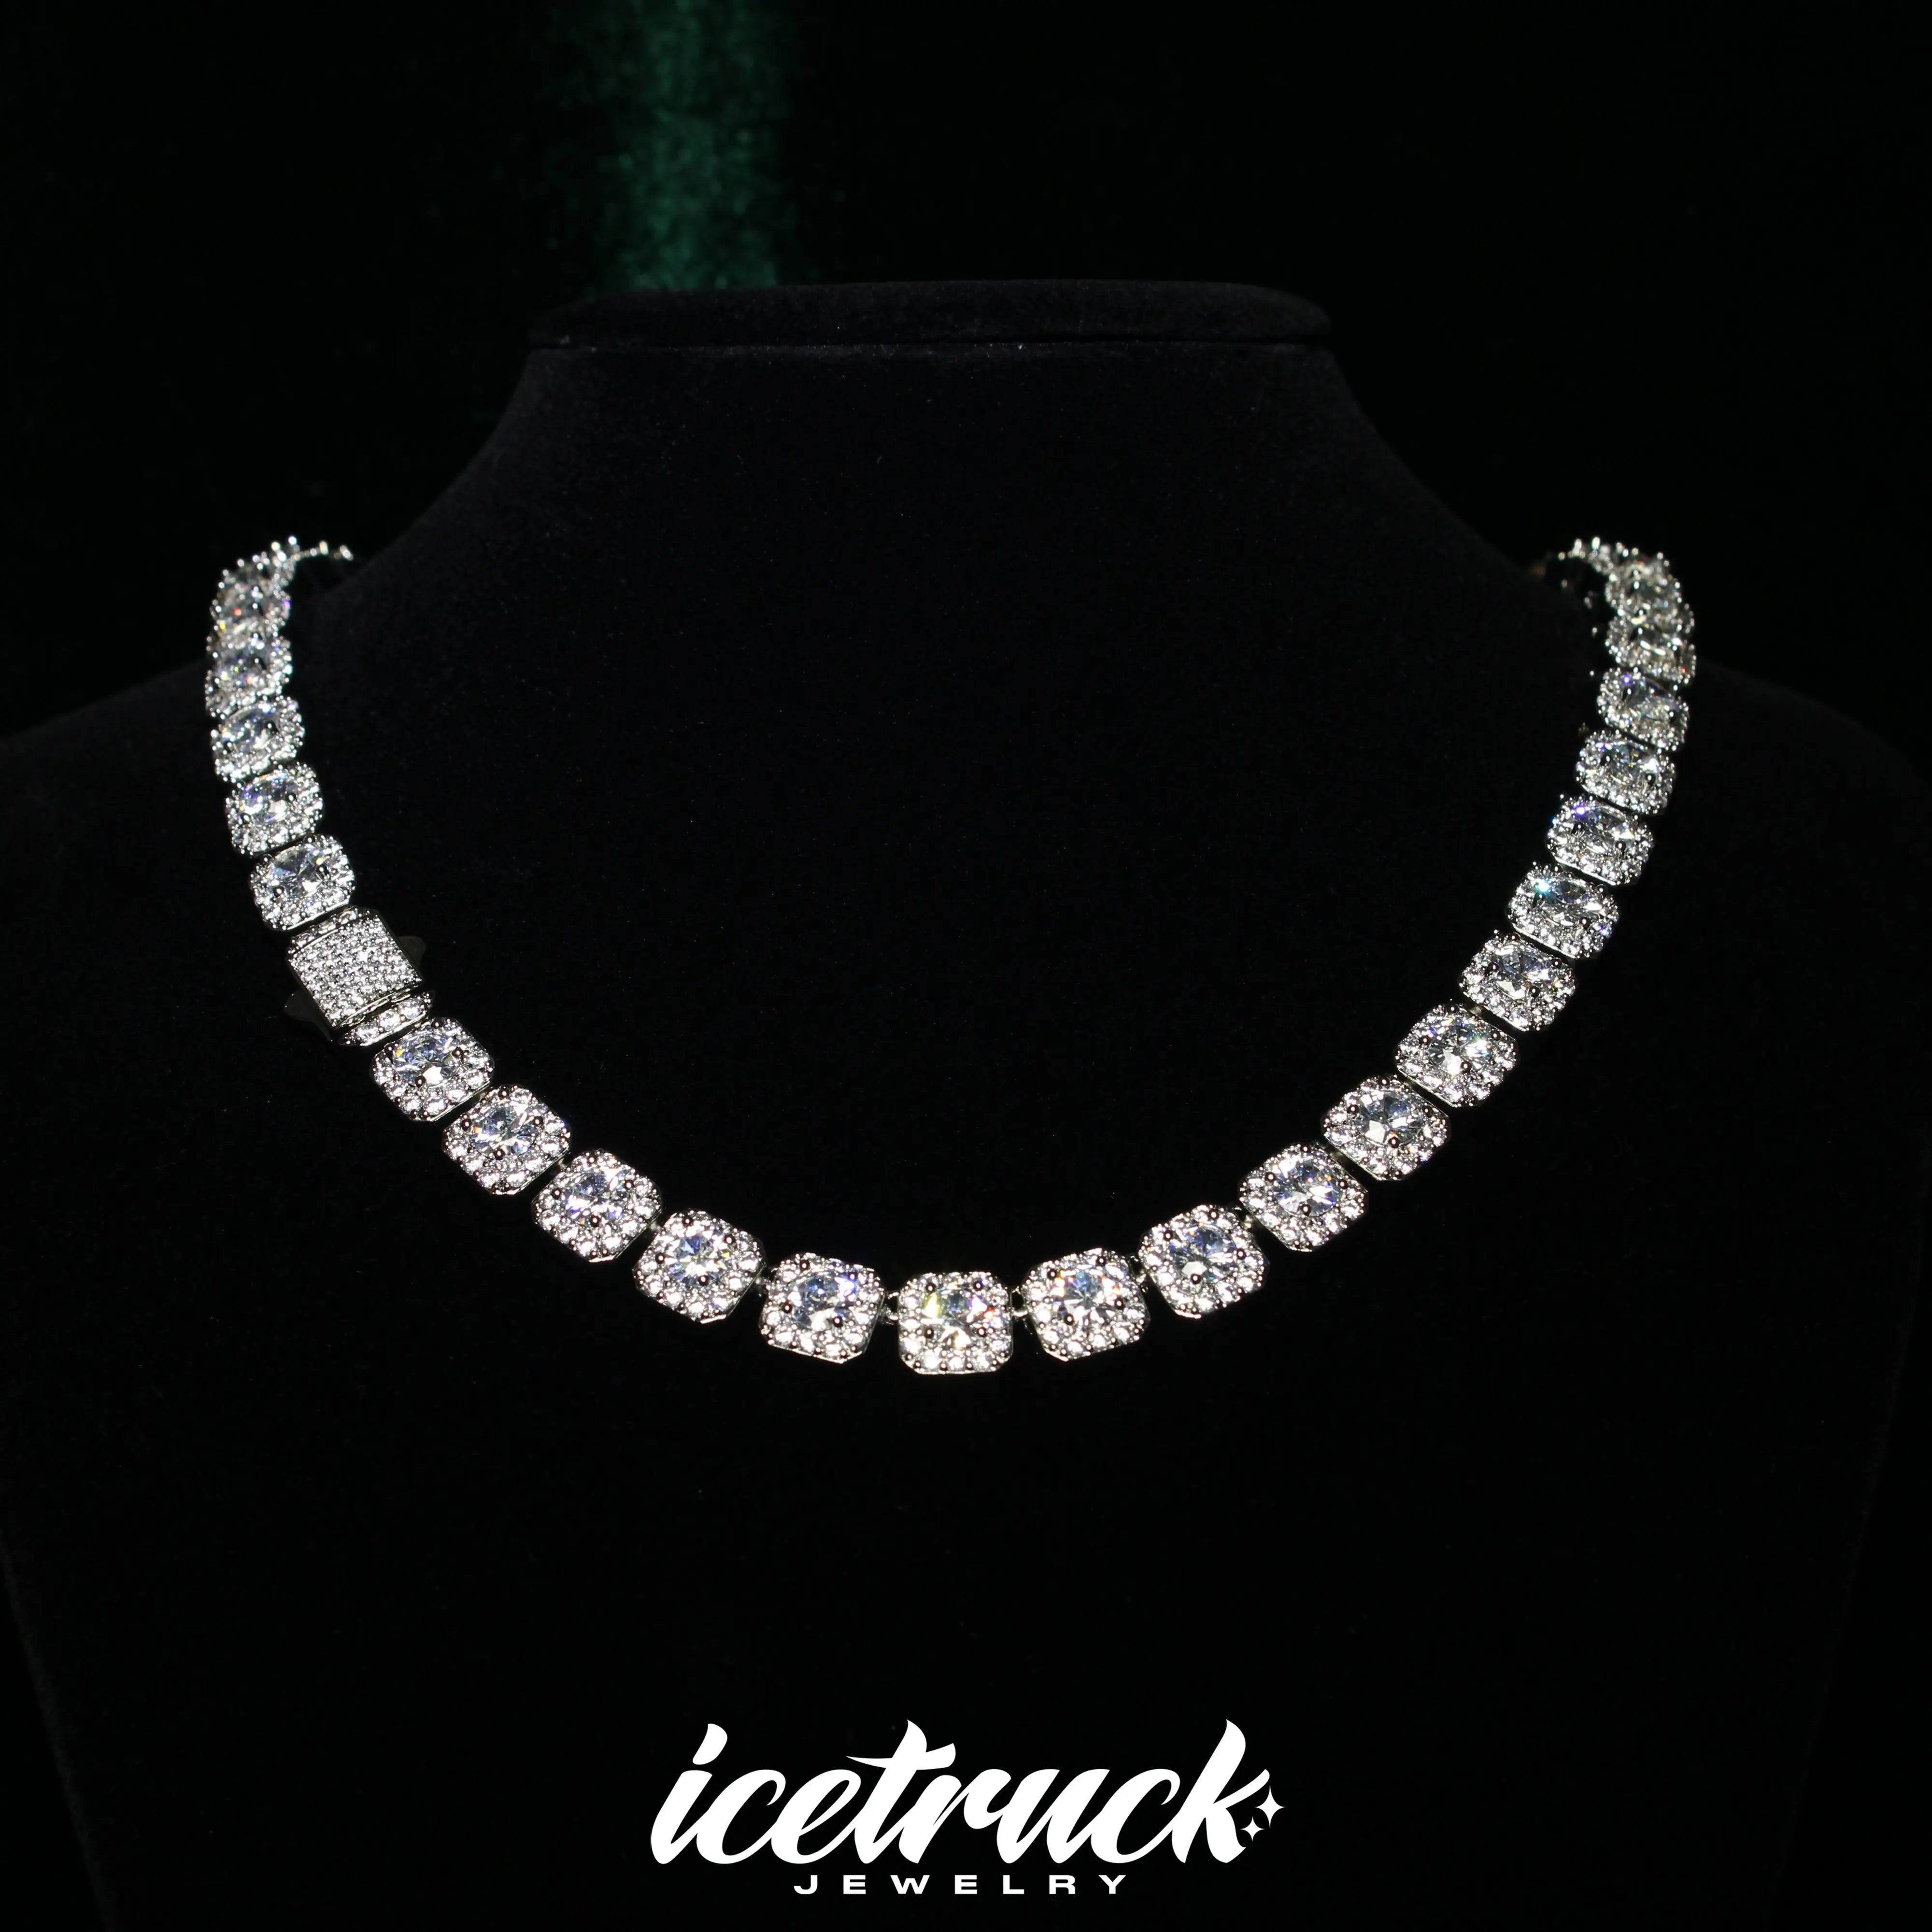 10mm Clustered Tennis Chain in White Gold | - The Icetruck